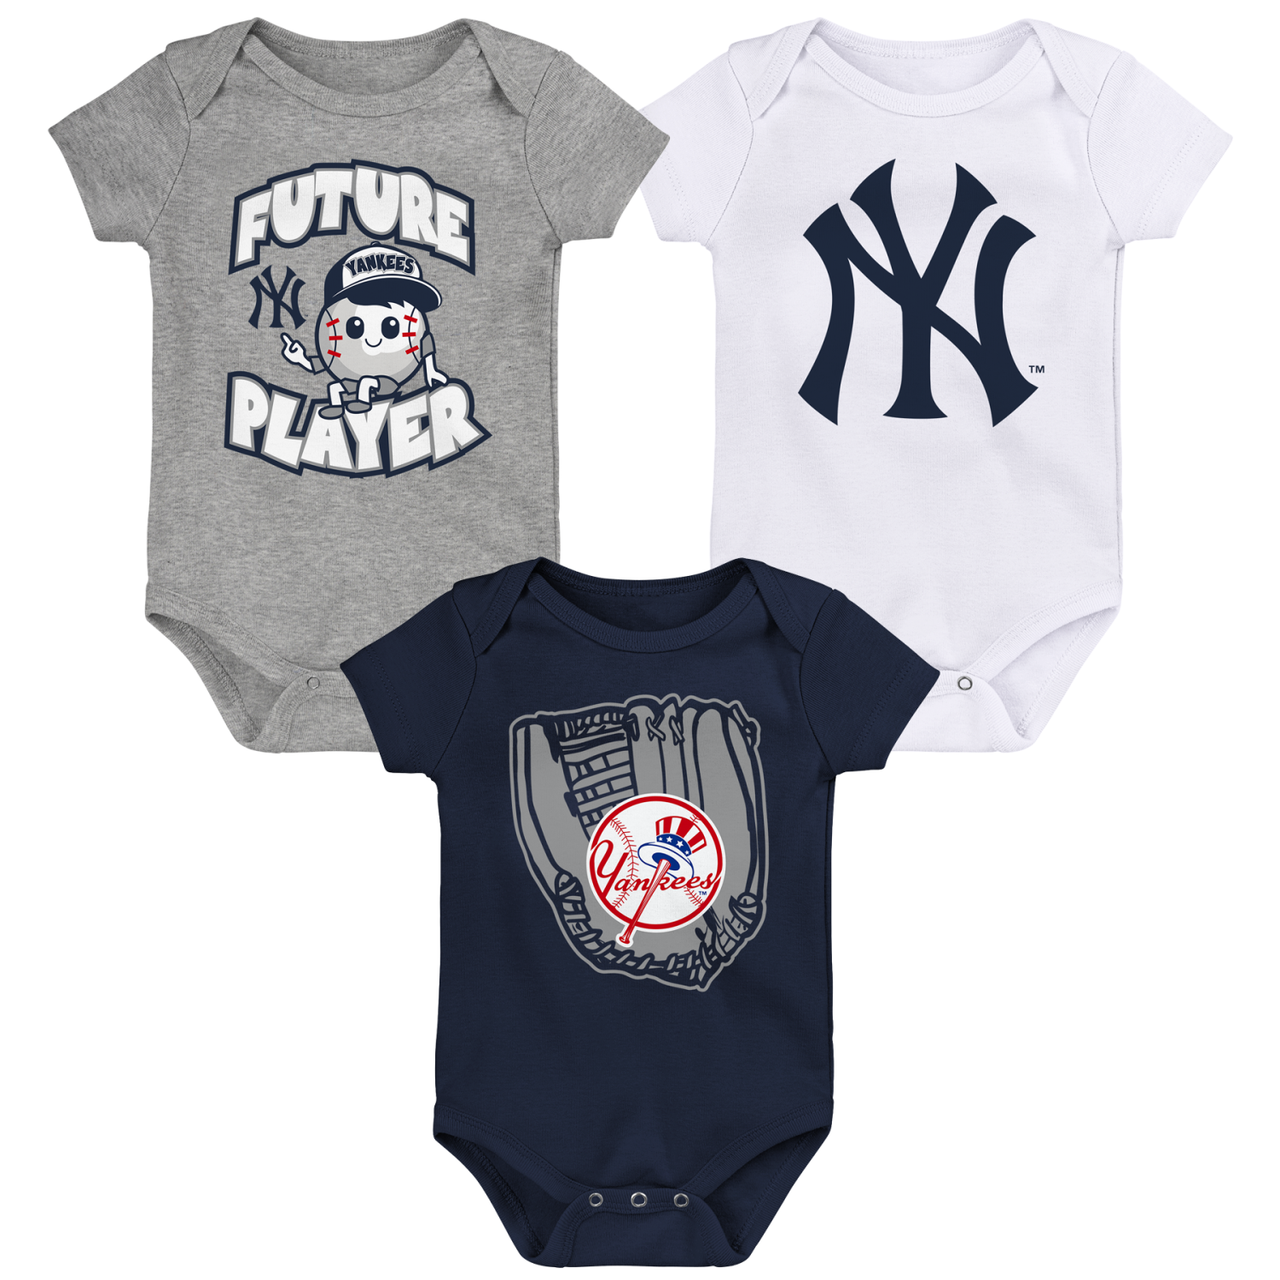  Yankees Baby Clothes